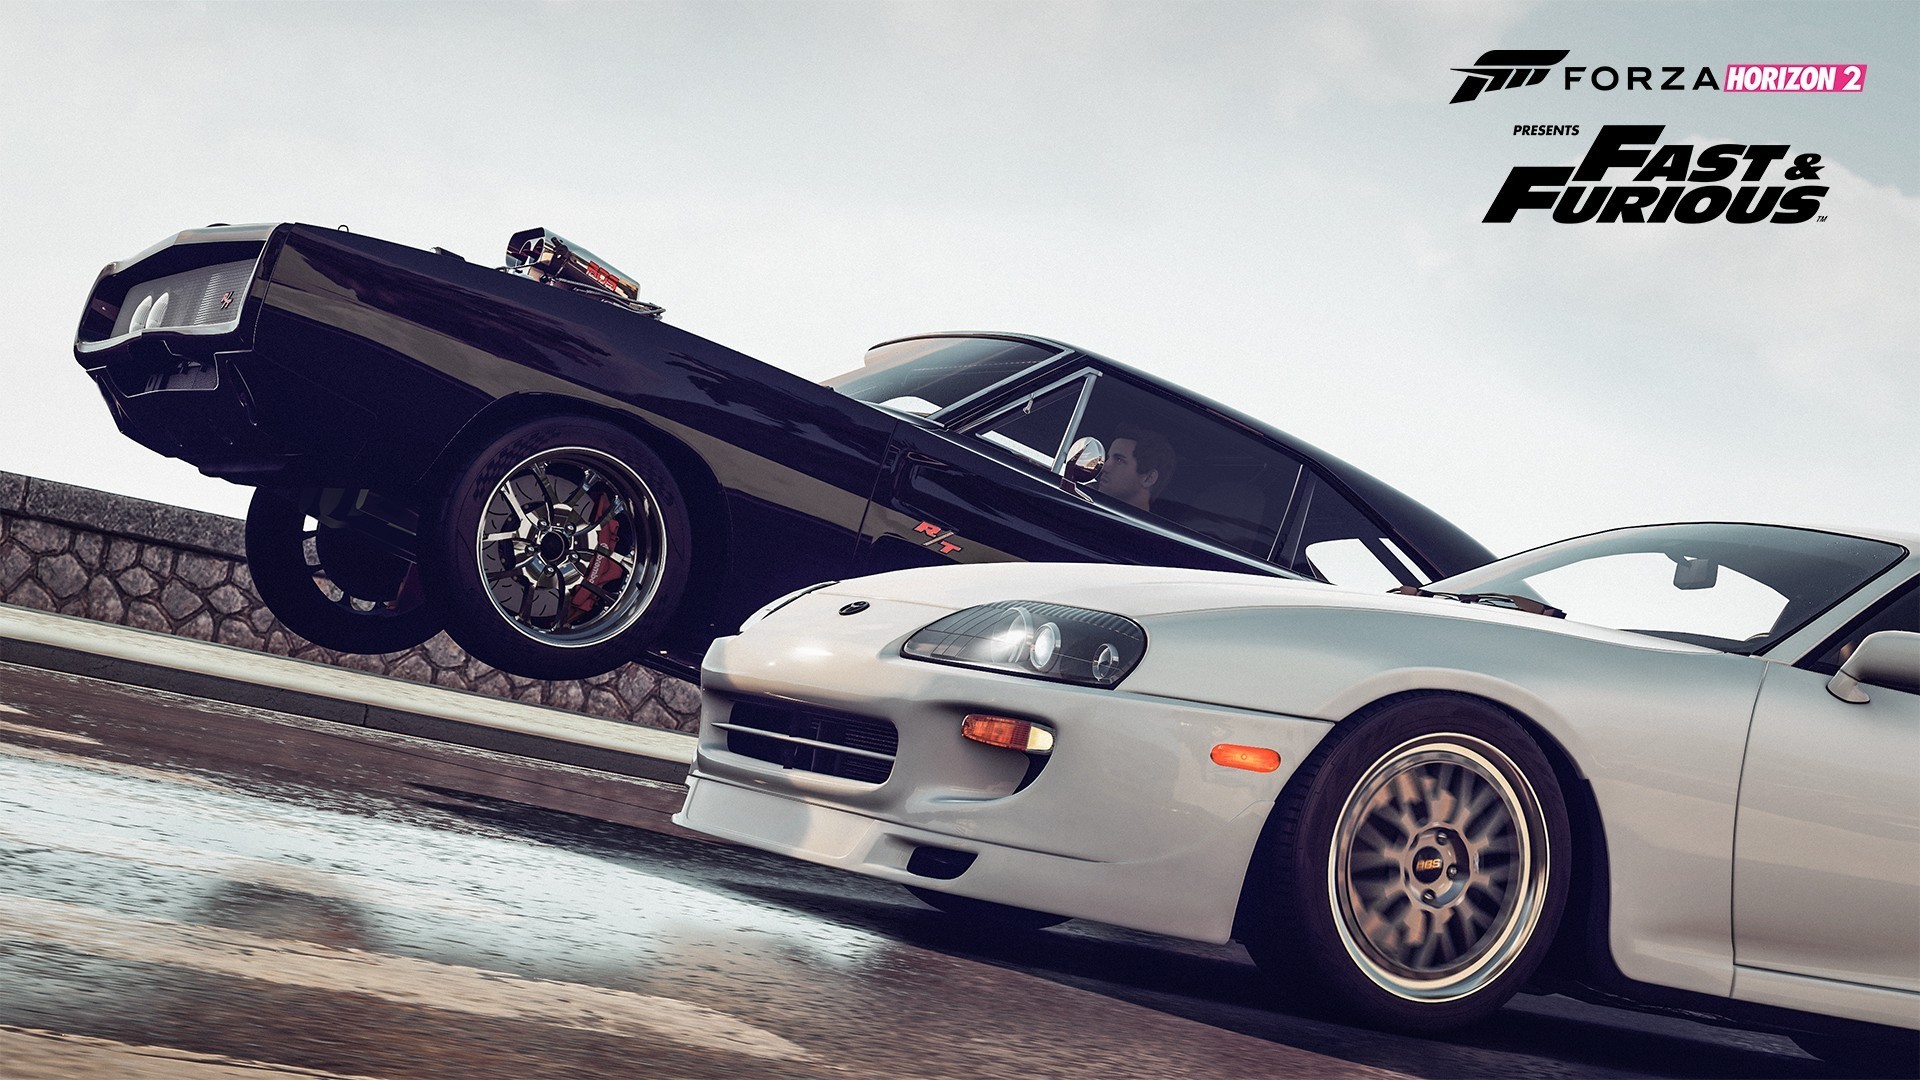 1920x1080 Forza-Horizon-2-Fast-and-Furious